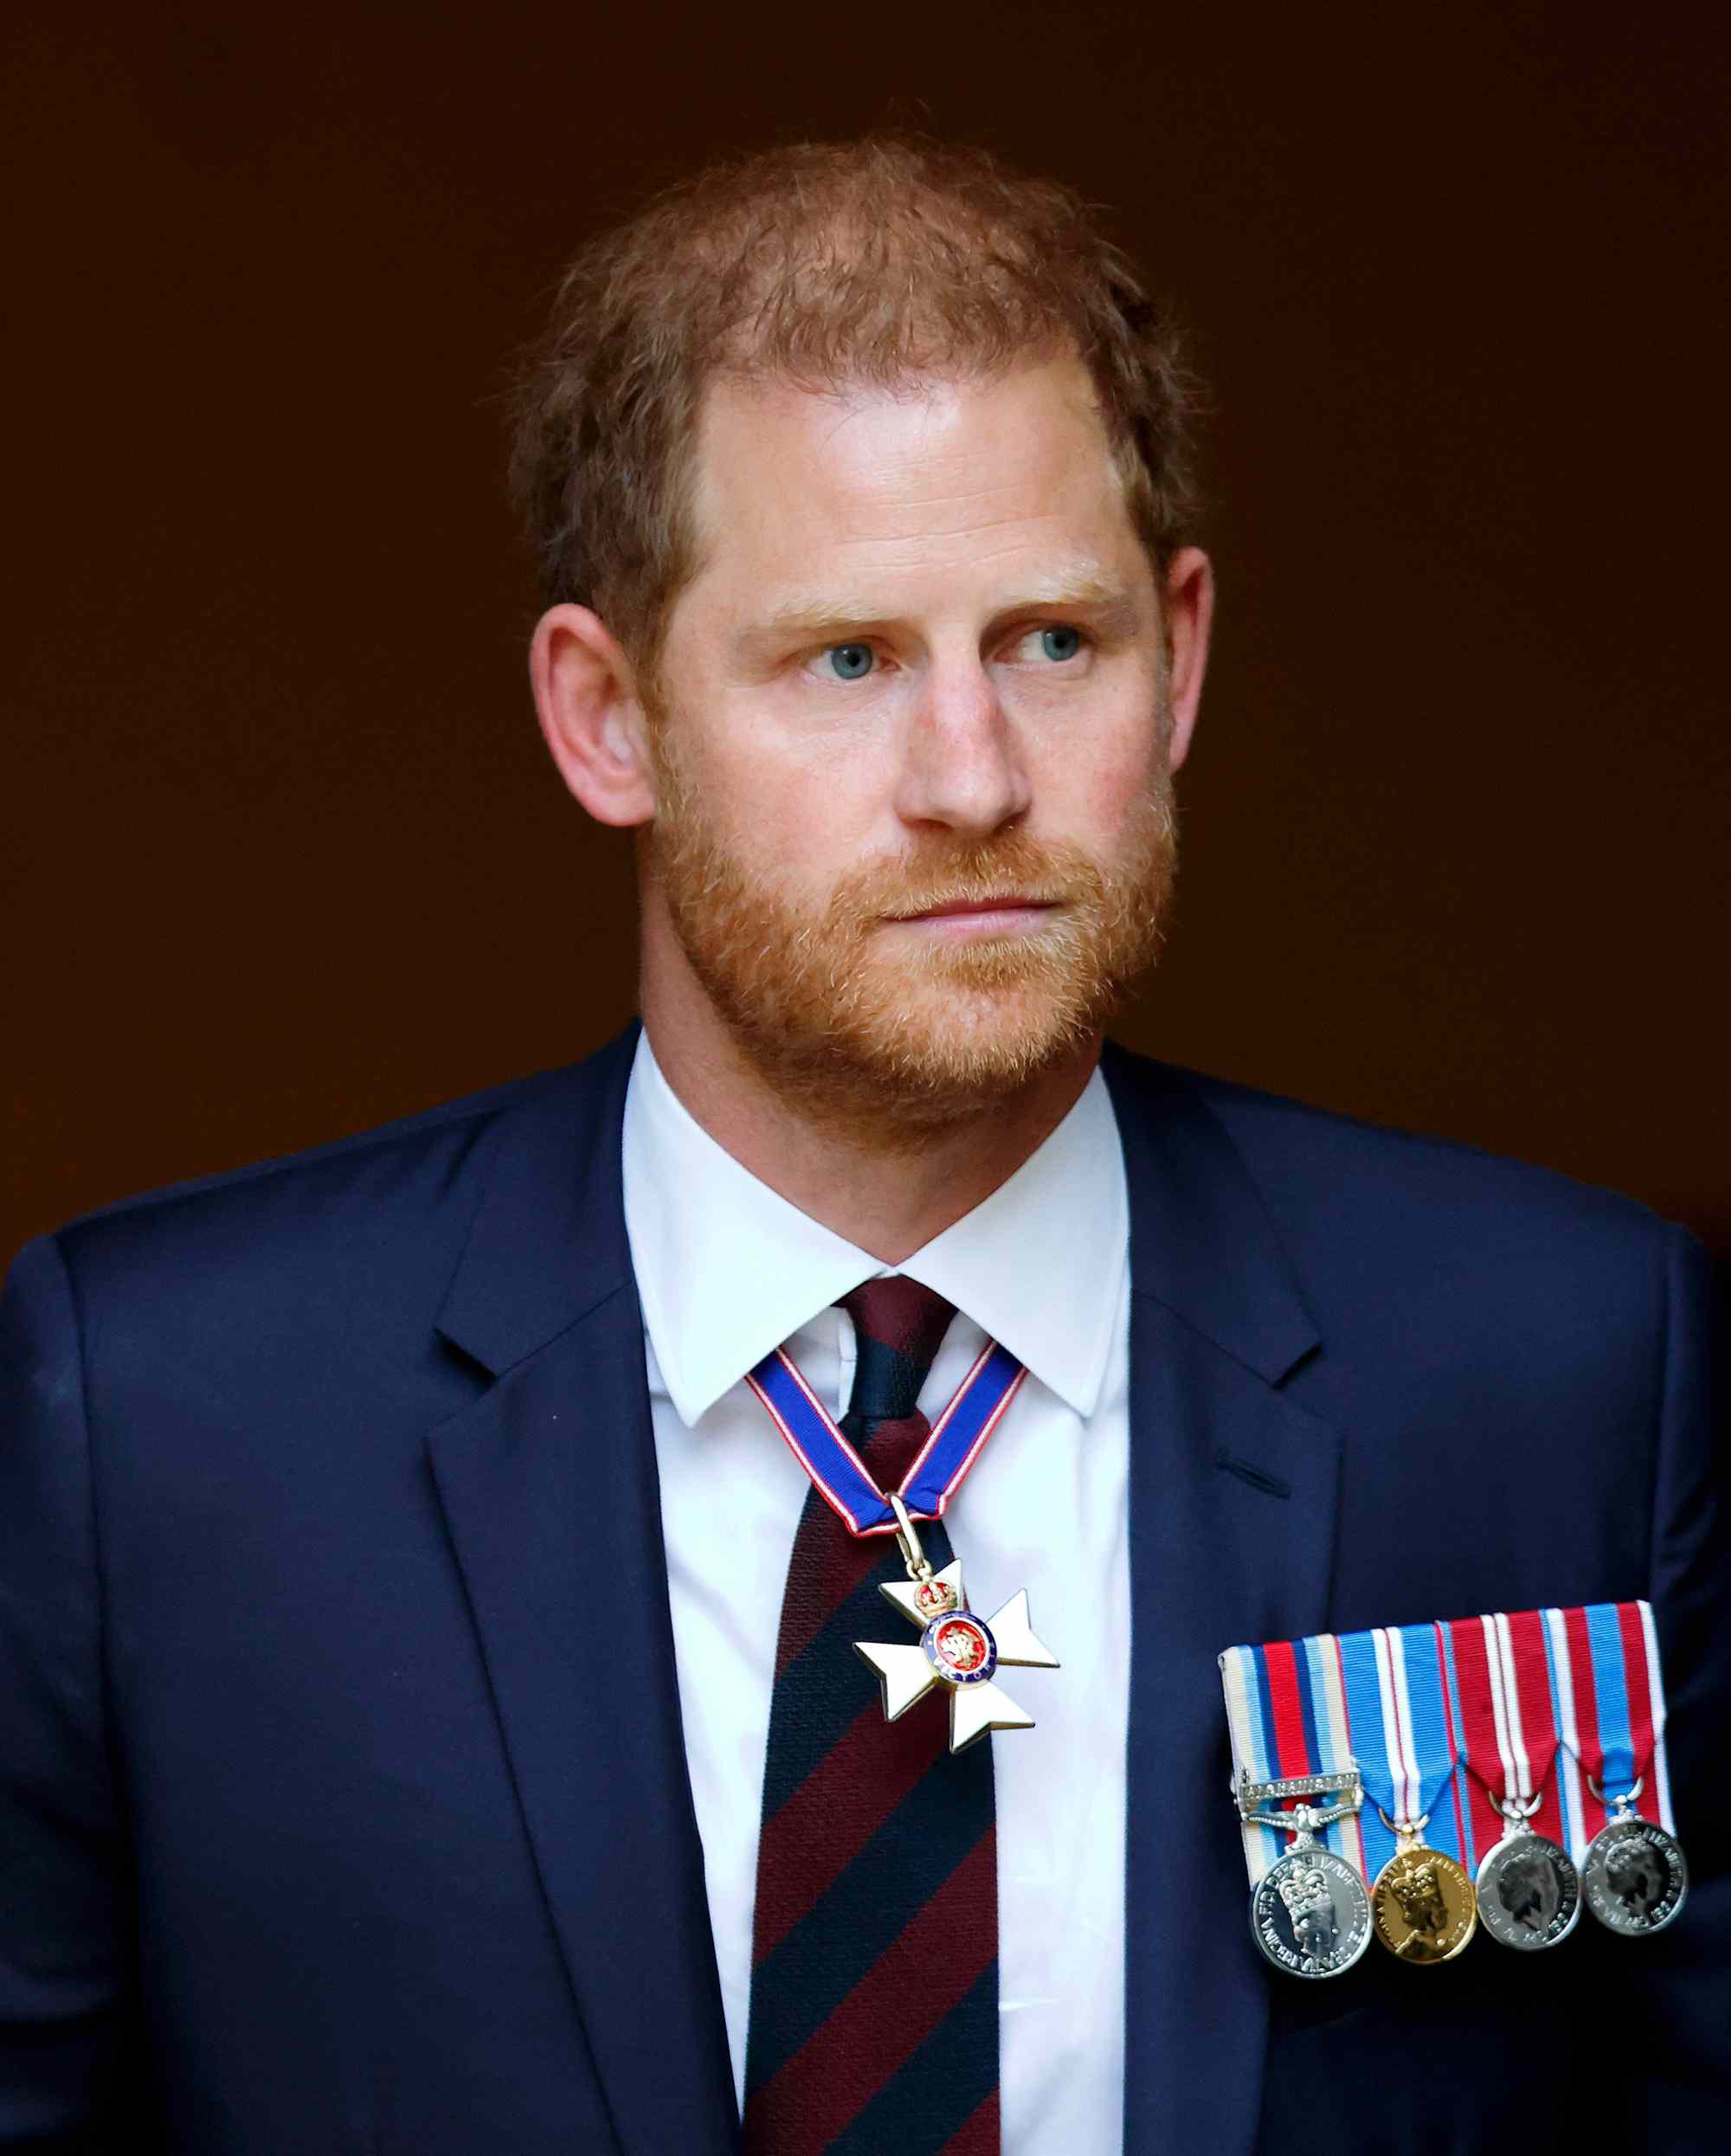 Prince Harry Is Reportedly “Nostalgic” for His “Old Life” in the U.K.